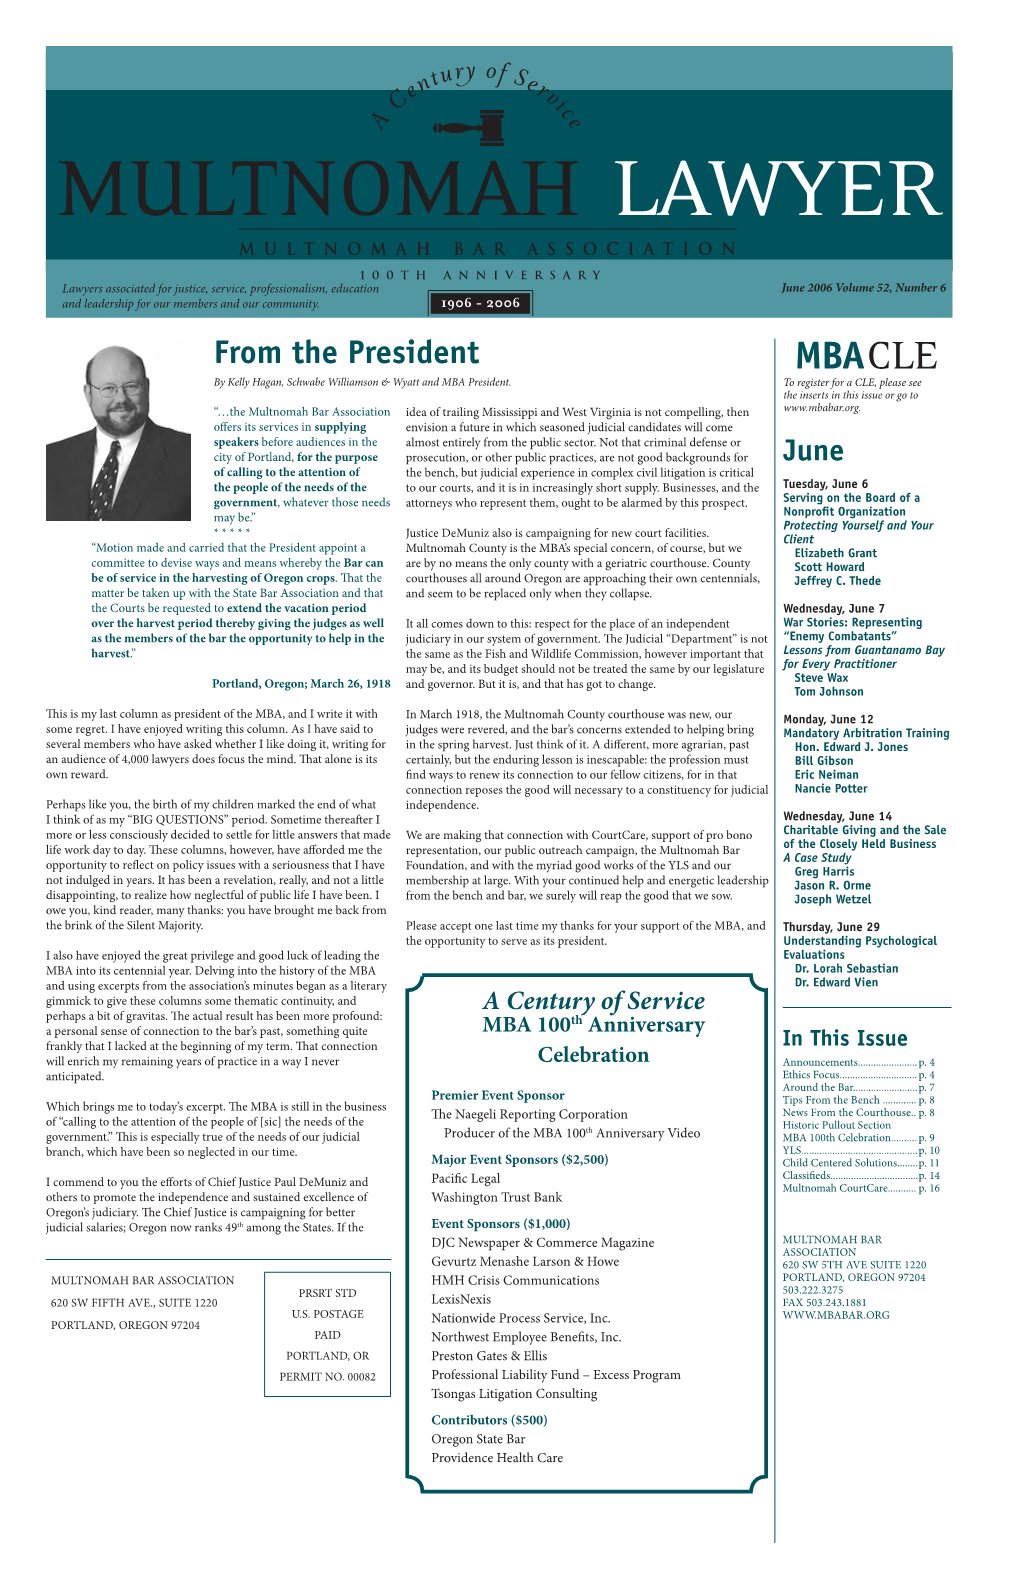 MBACLE by Kelly Hagan, Schwabe Williamson & Wyatt and MBA President